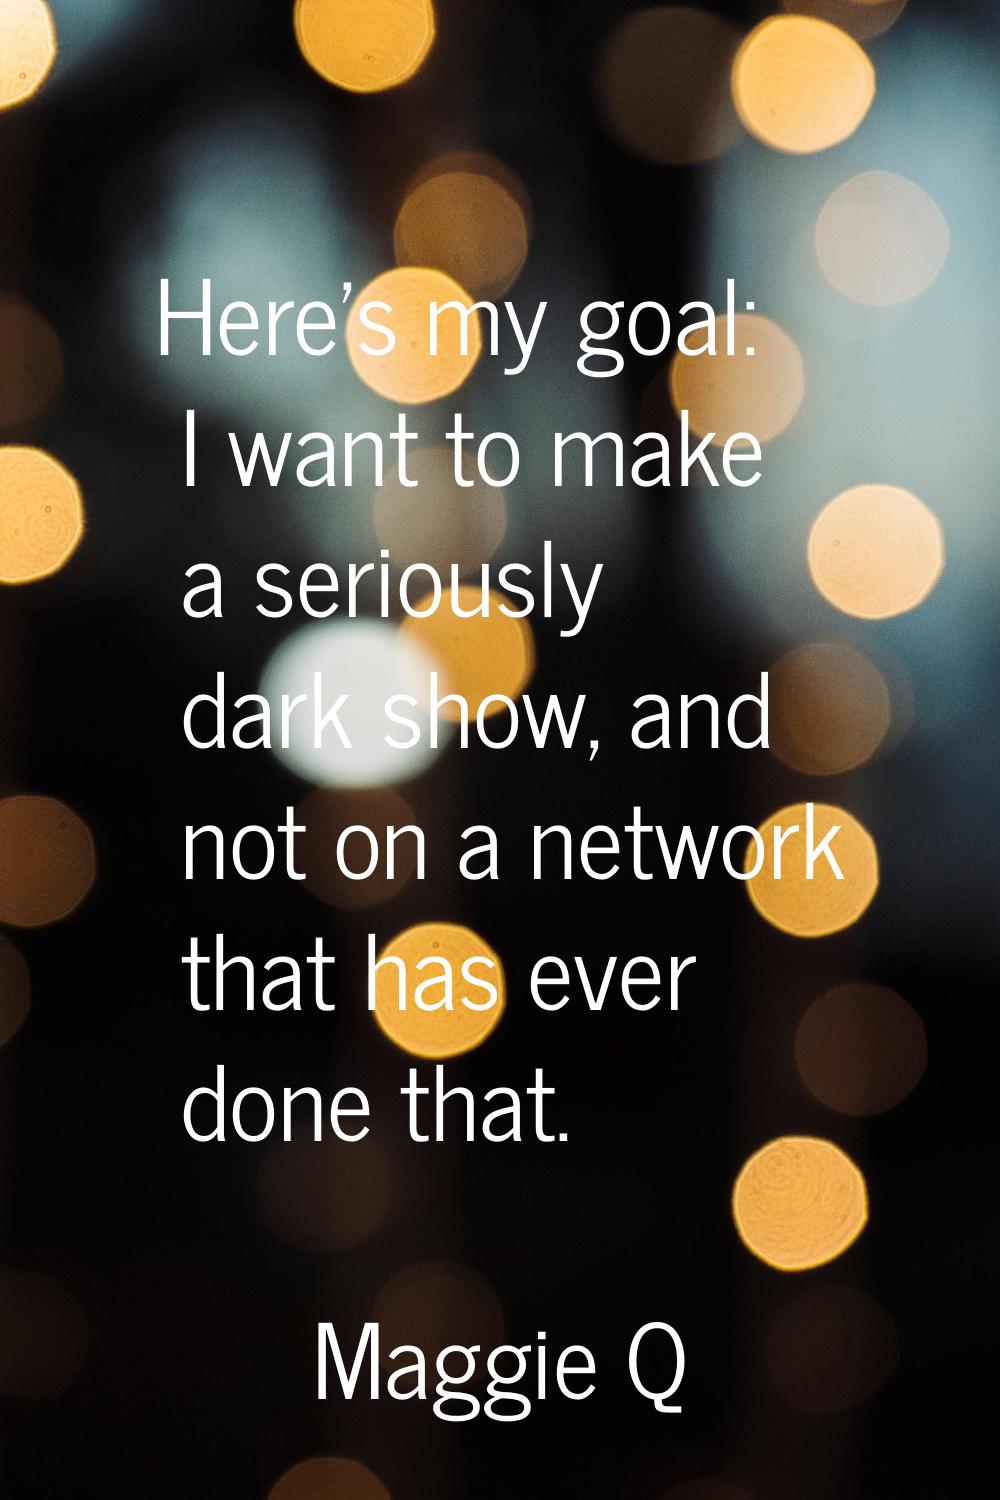 Here's my goal: I want to make a seriously dark show, and not on a network that has ever done that.